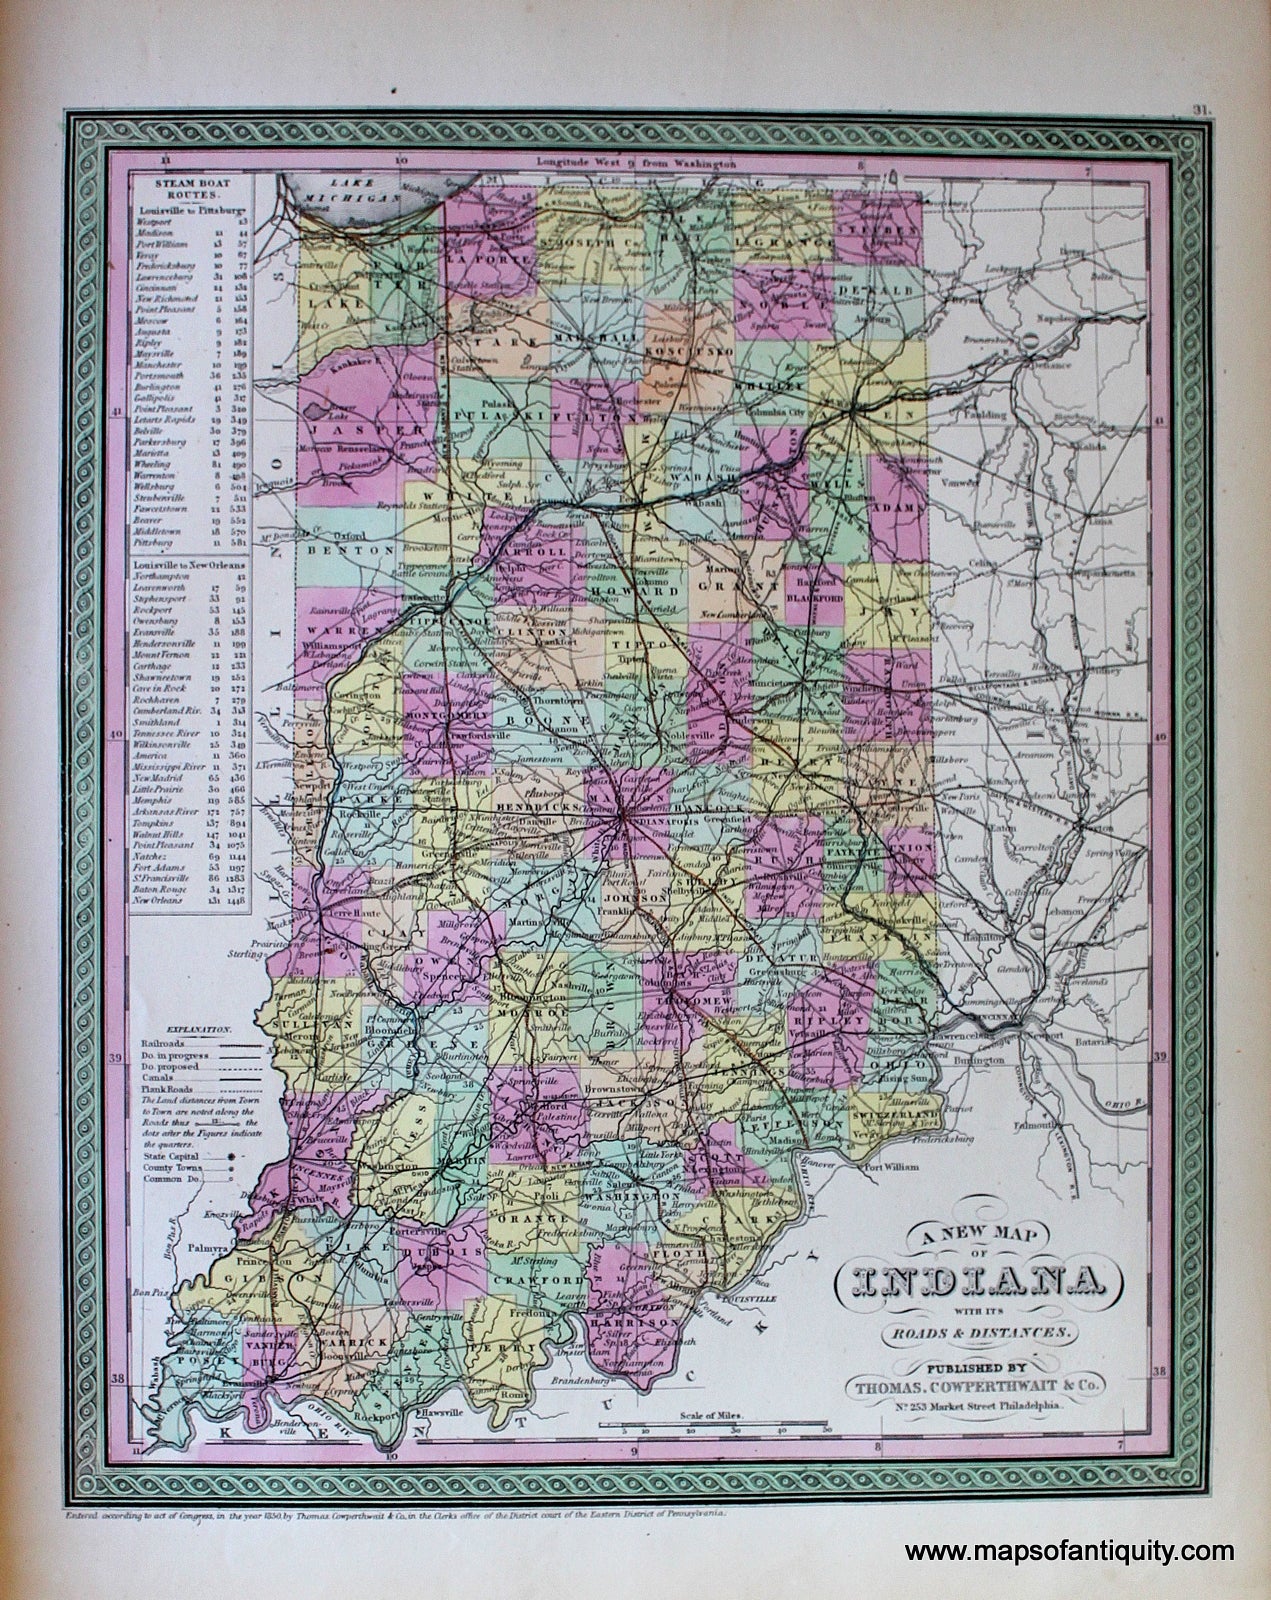 Antique-Hand-Colored-Map-A-New-Map-of-Indiana-with-its-Roads-&-Distances.-United-States-Midwest-1854-Mitchell/Cowperthwait-Desilver-&-Butler-Maps-Of-Antiquity